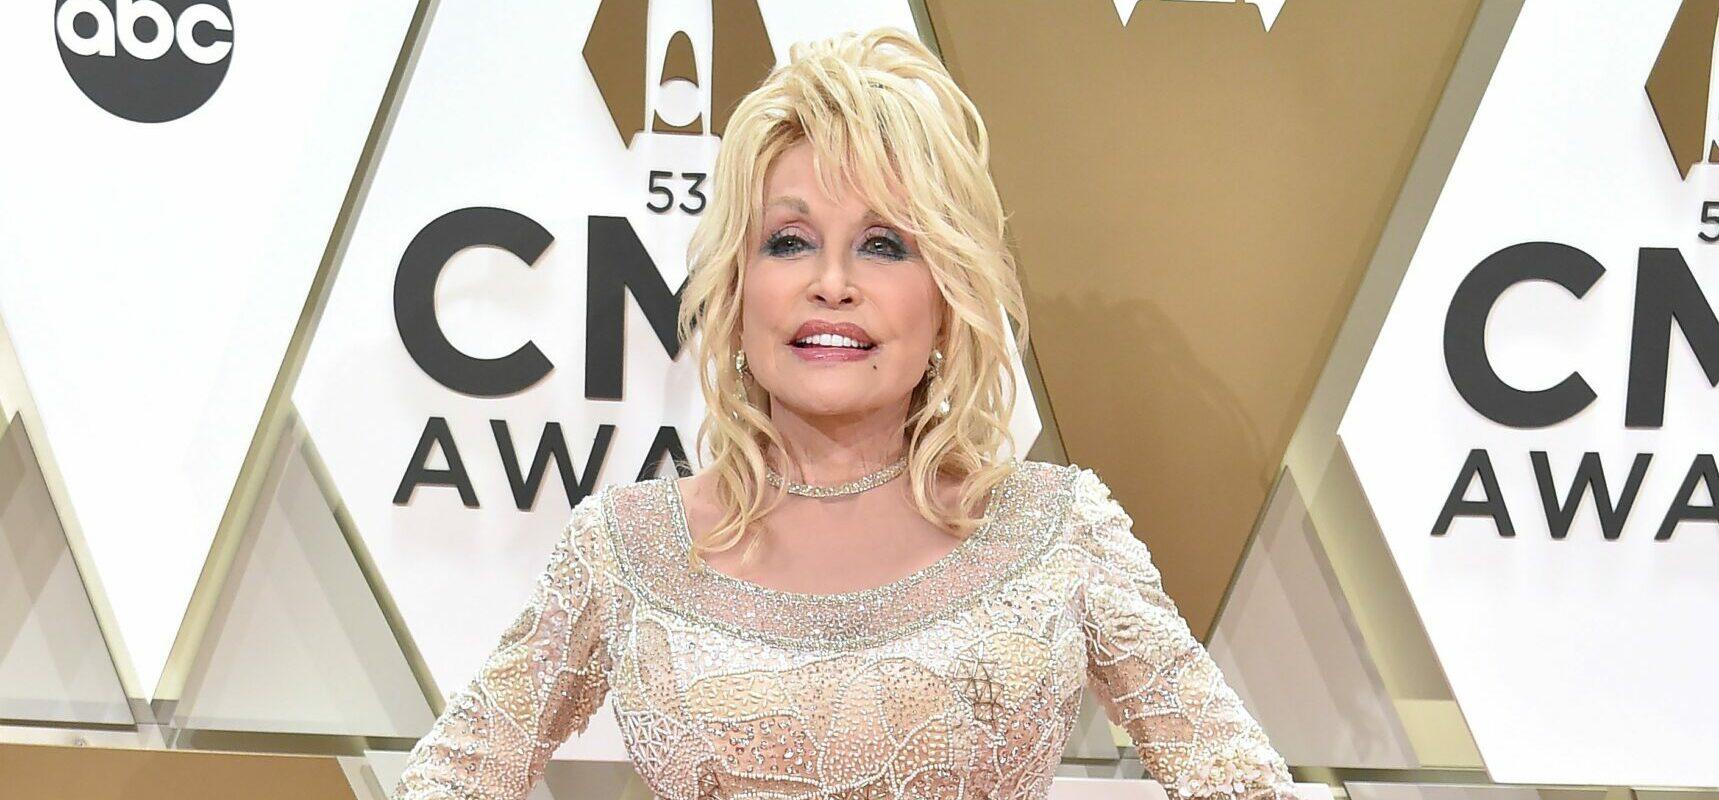 Dolly Parton at The 53rd Annual CMA Awards - Arrivals